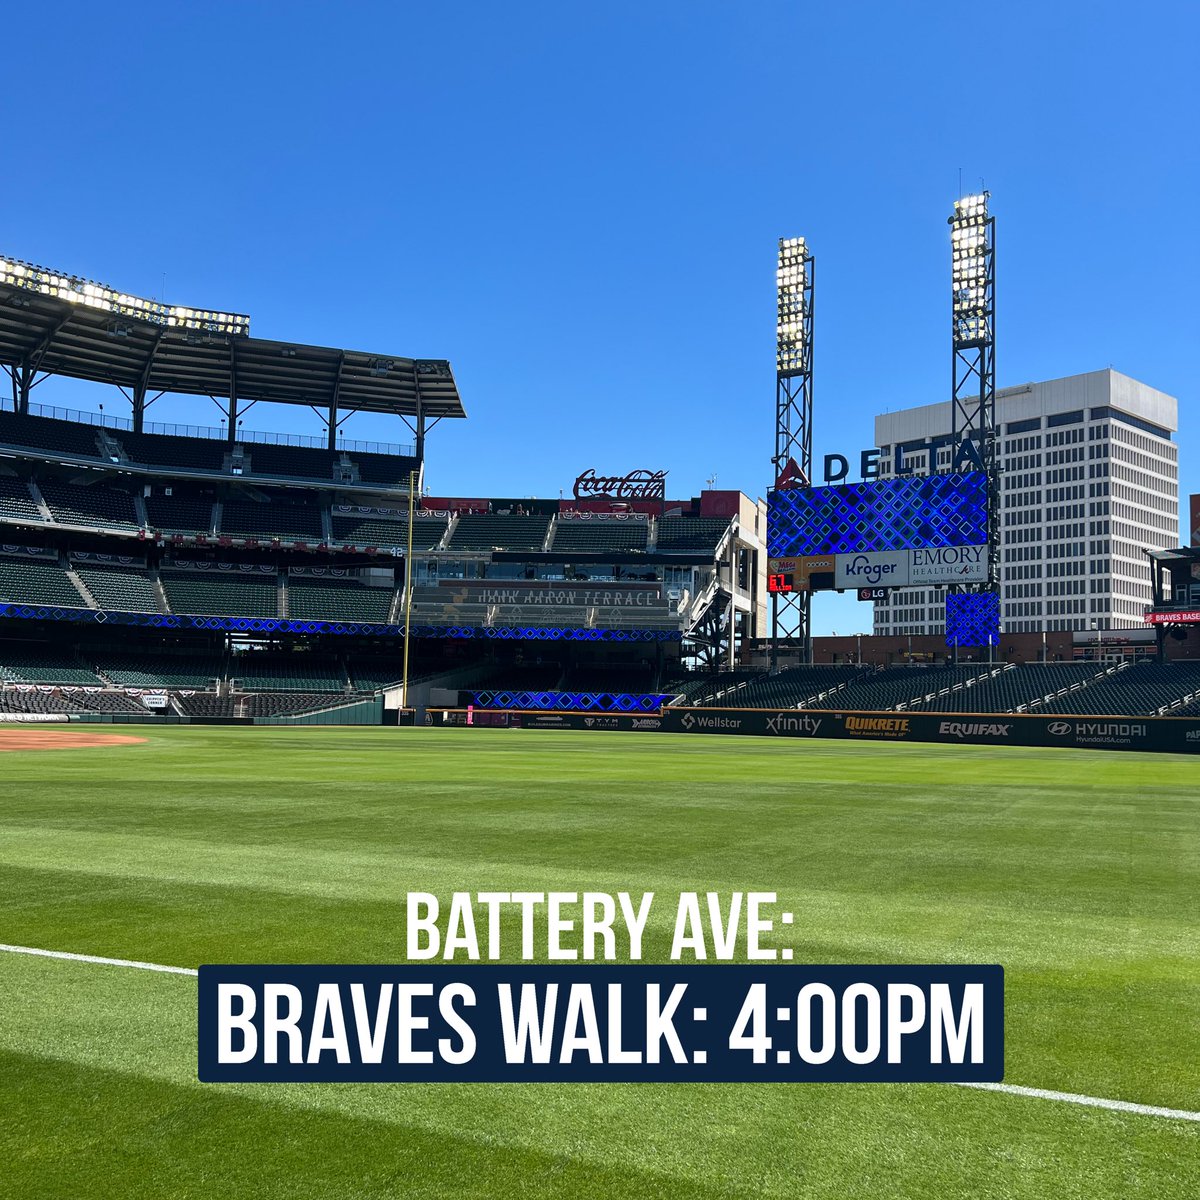 Braves Walk starts in 5! Line up along Battery Ave. for a view of all your favorite players entering the park!